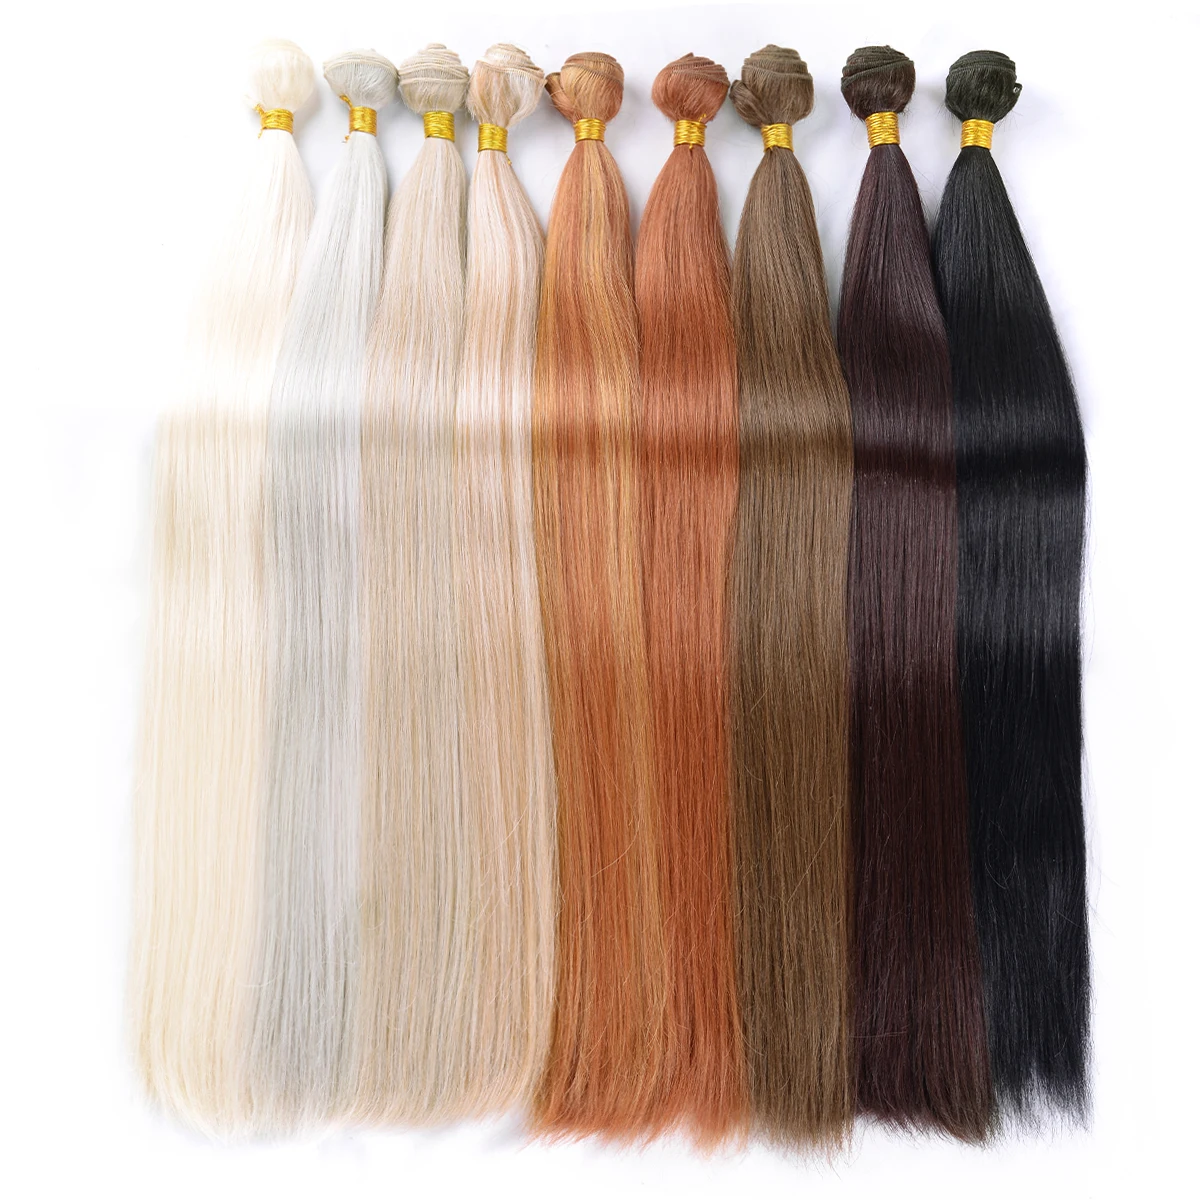 Synthetic Long Straight Hair Bundles Extensions Heat Resistant 24Inch Super Long Synthetic Straight Hair Bundles Full to End